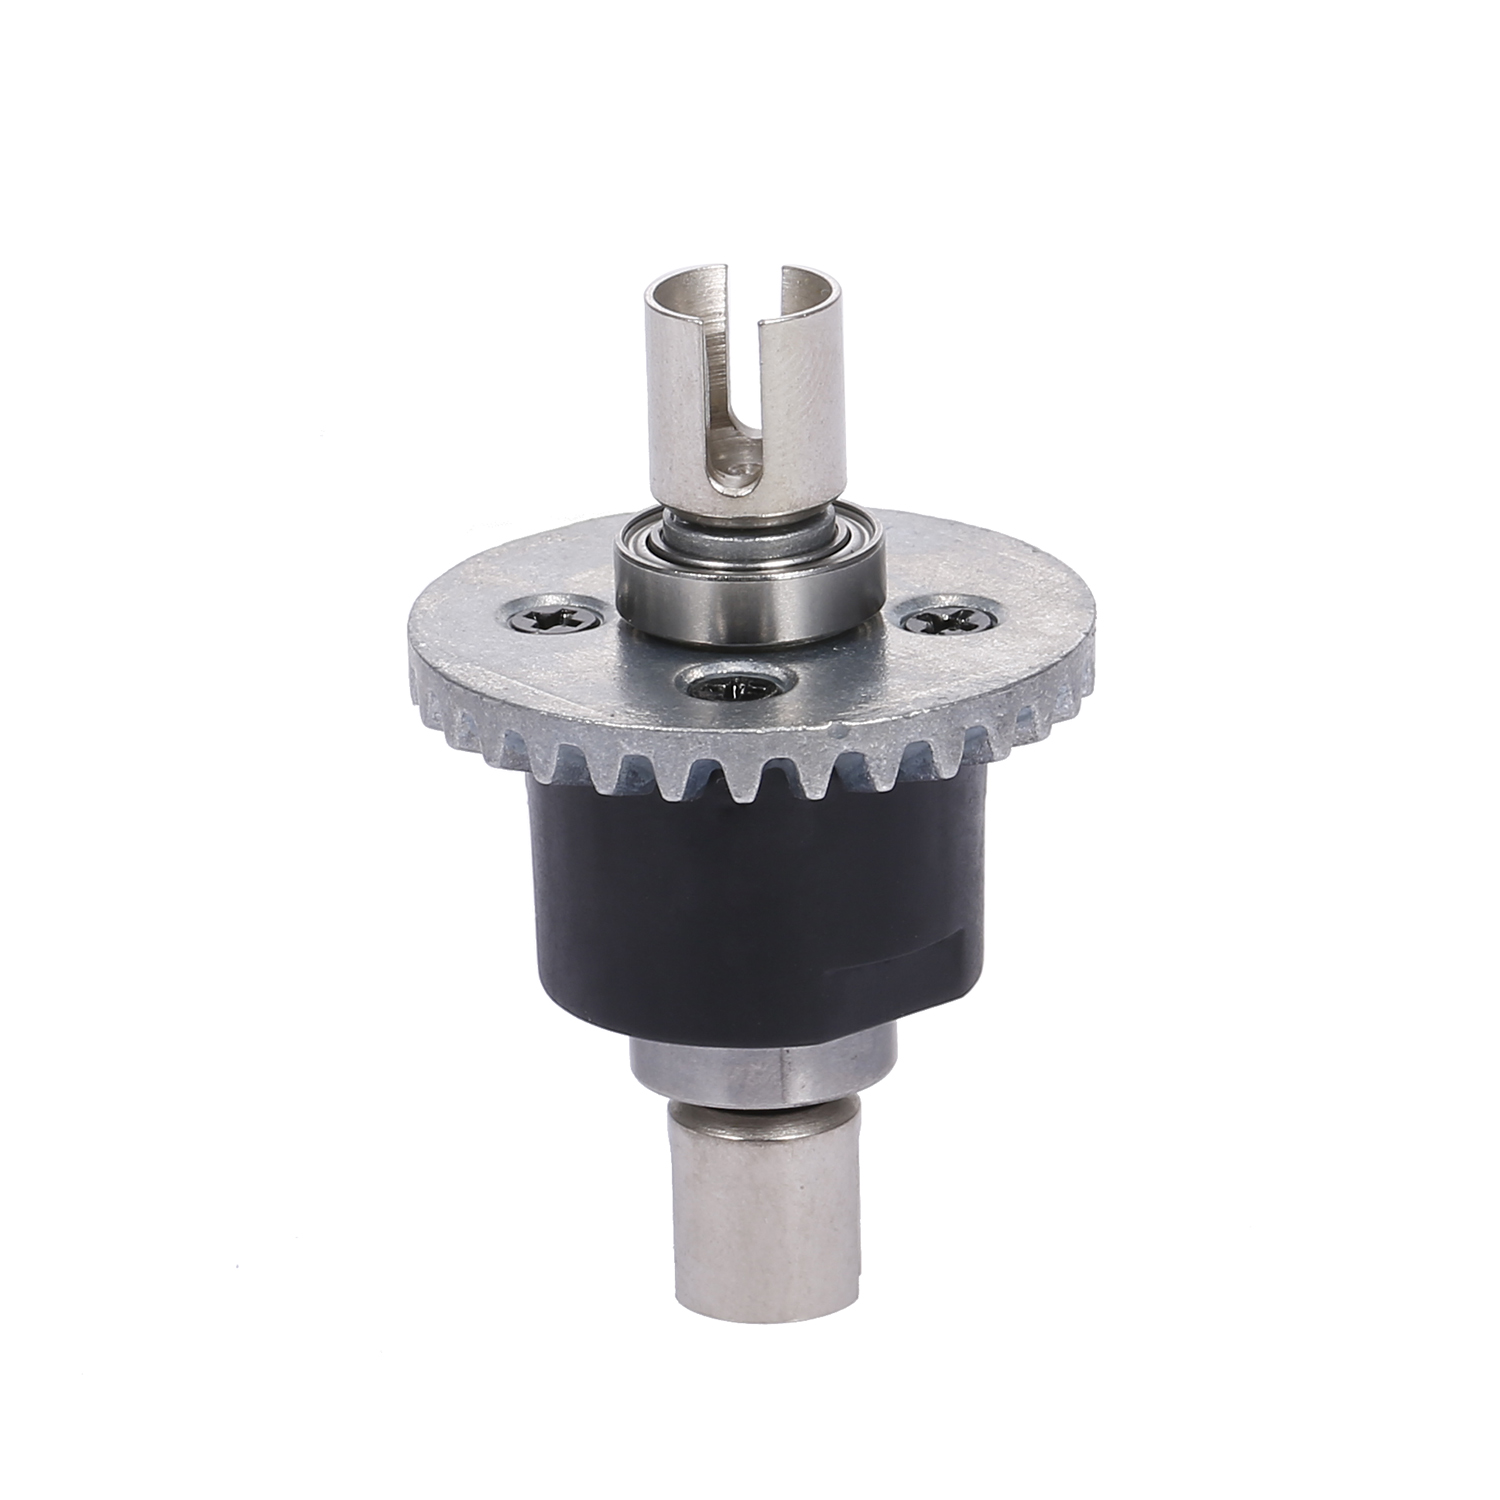 WLtoys Metal Differential for Wltoys XK 144001 RC Car Replacement Part Differential Gear for Wltoys XK 144001 114 2.4GHz RC - image 5 of 7